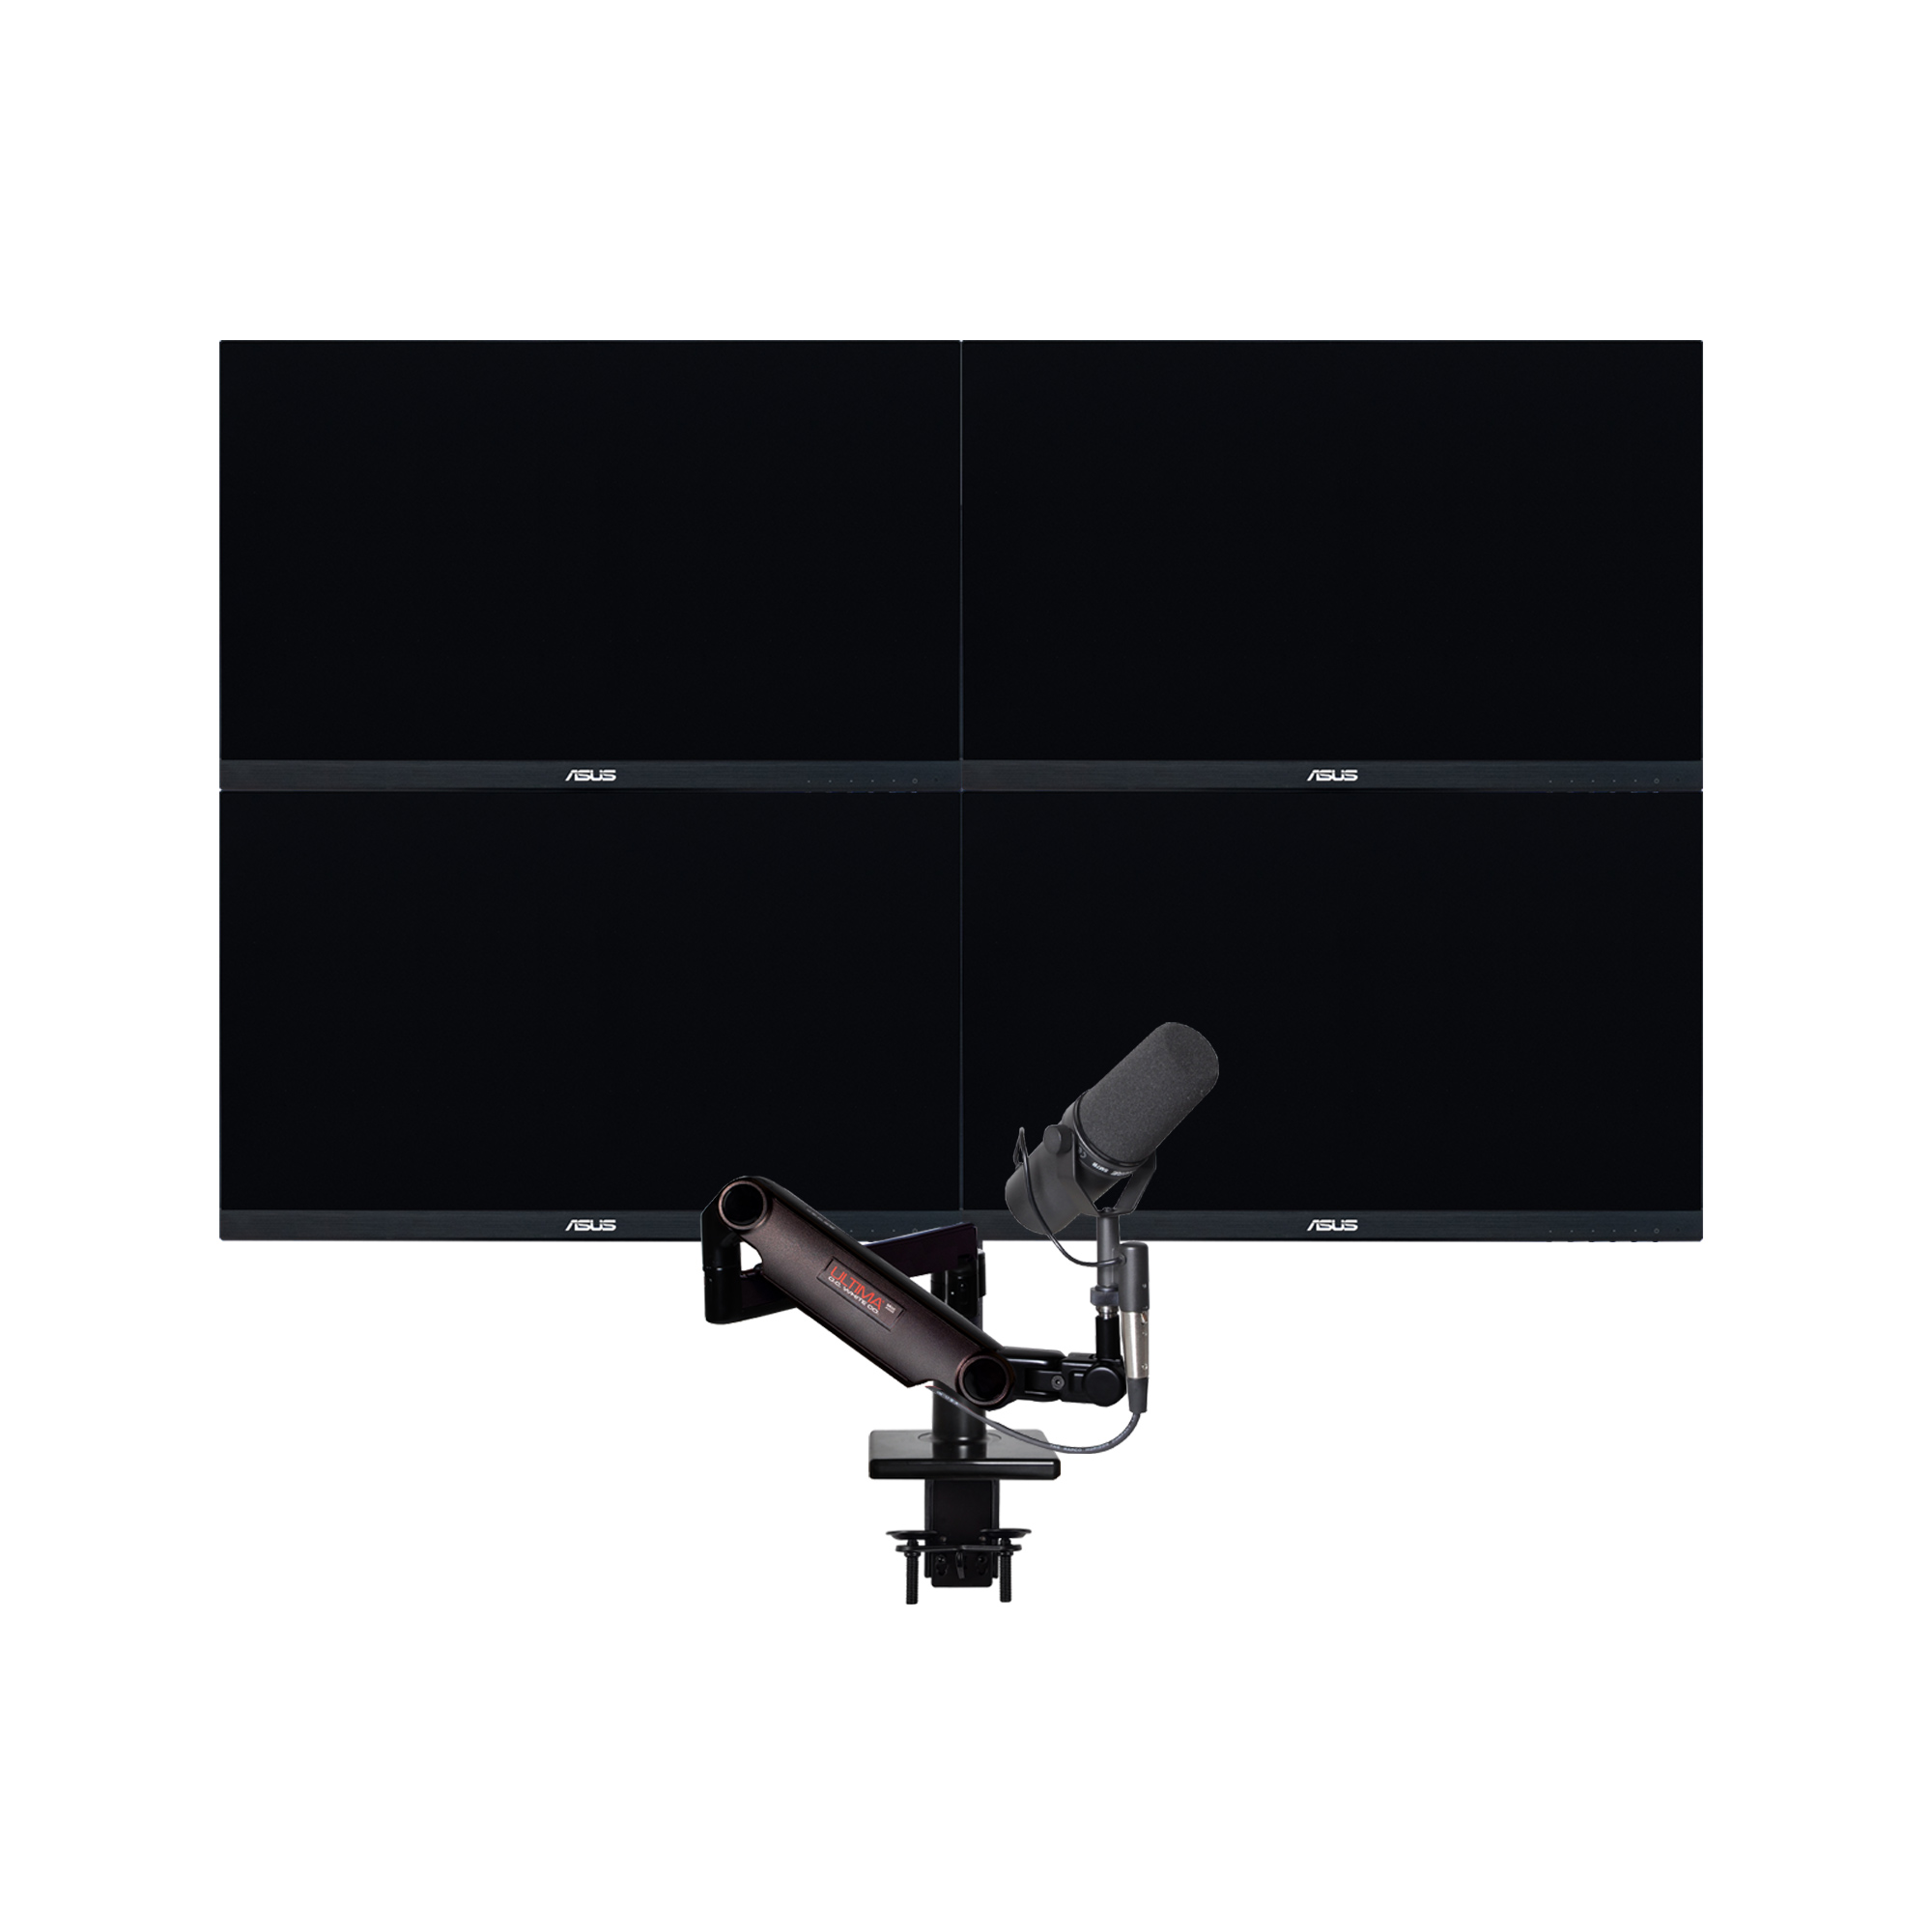 Quad Monitor Single Low Profile Mic - Four monitors, One Microphone, Scalable Monitor Support System - Featured Image